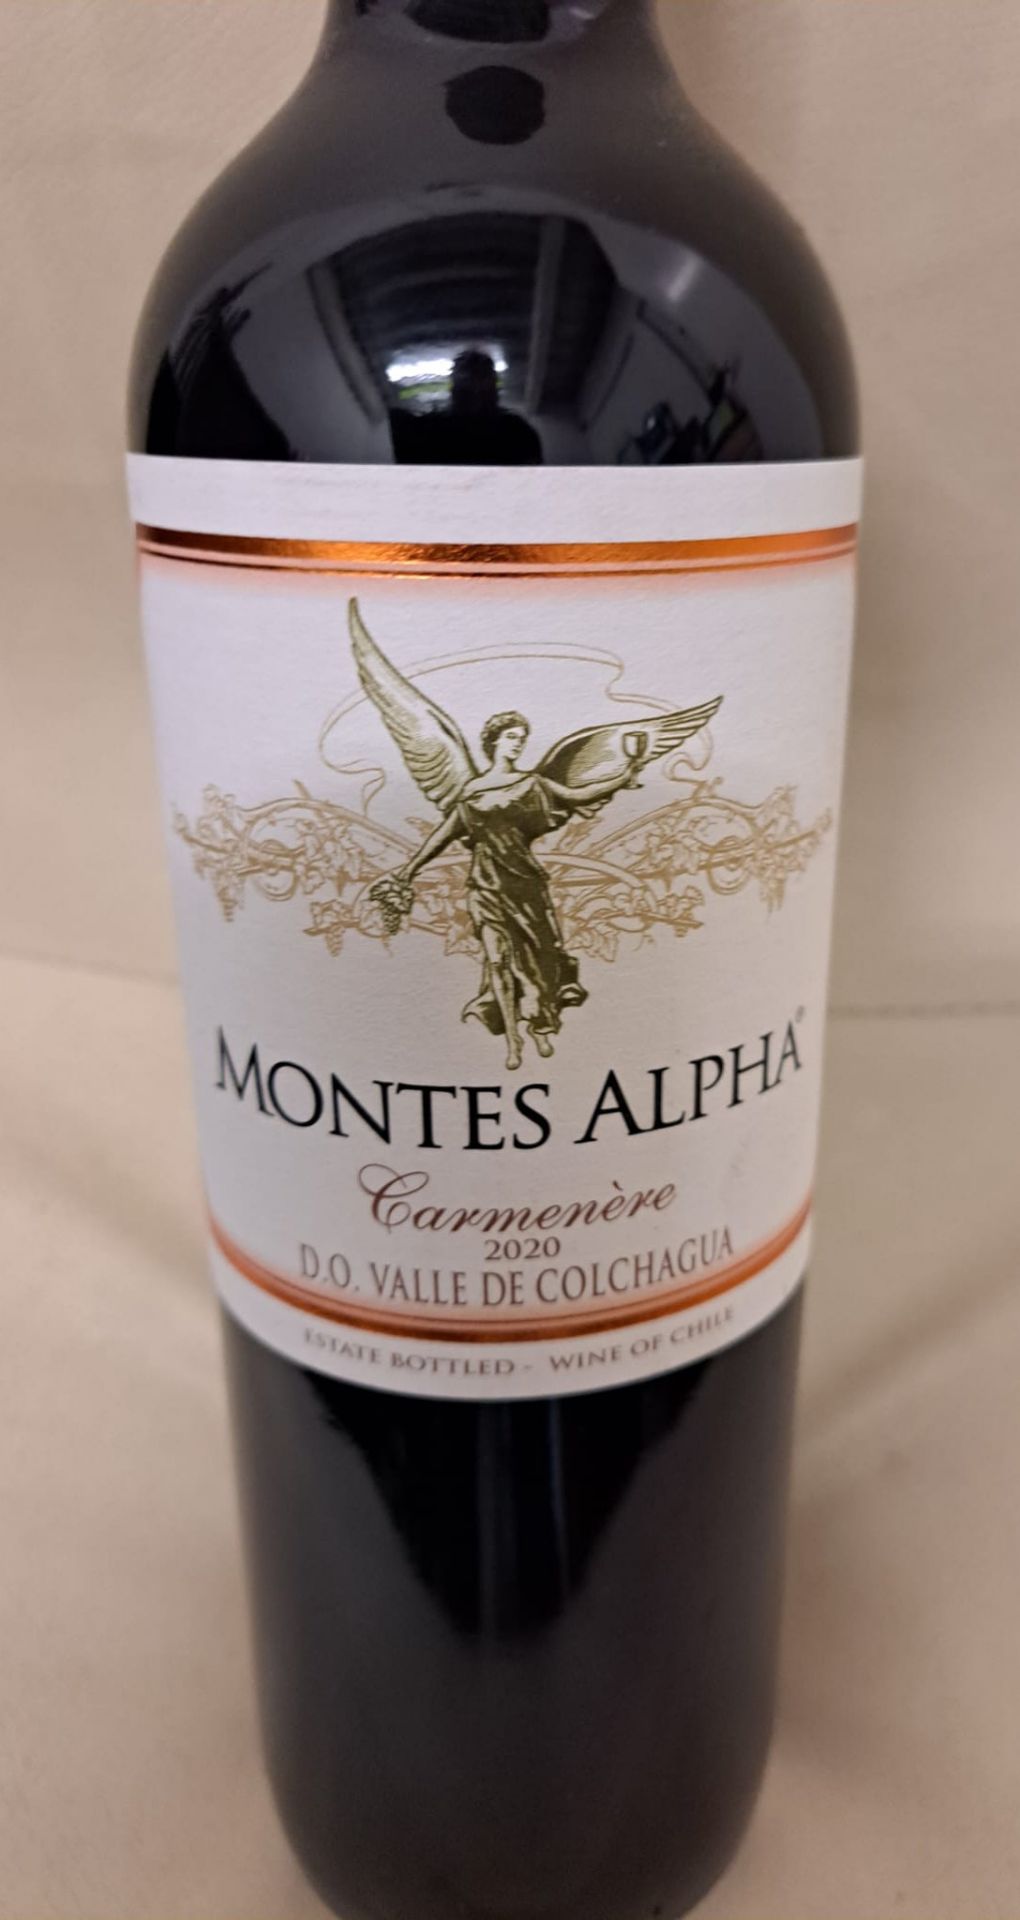 15 x Bottles of 2020 Montes Alpha Carmenere Red Wine - Retail Price £300 - Ref: WAS035B - CL866 - - Image 2 of 2